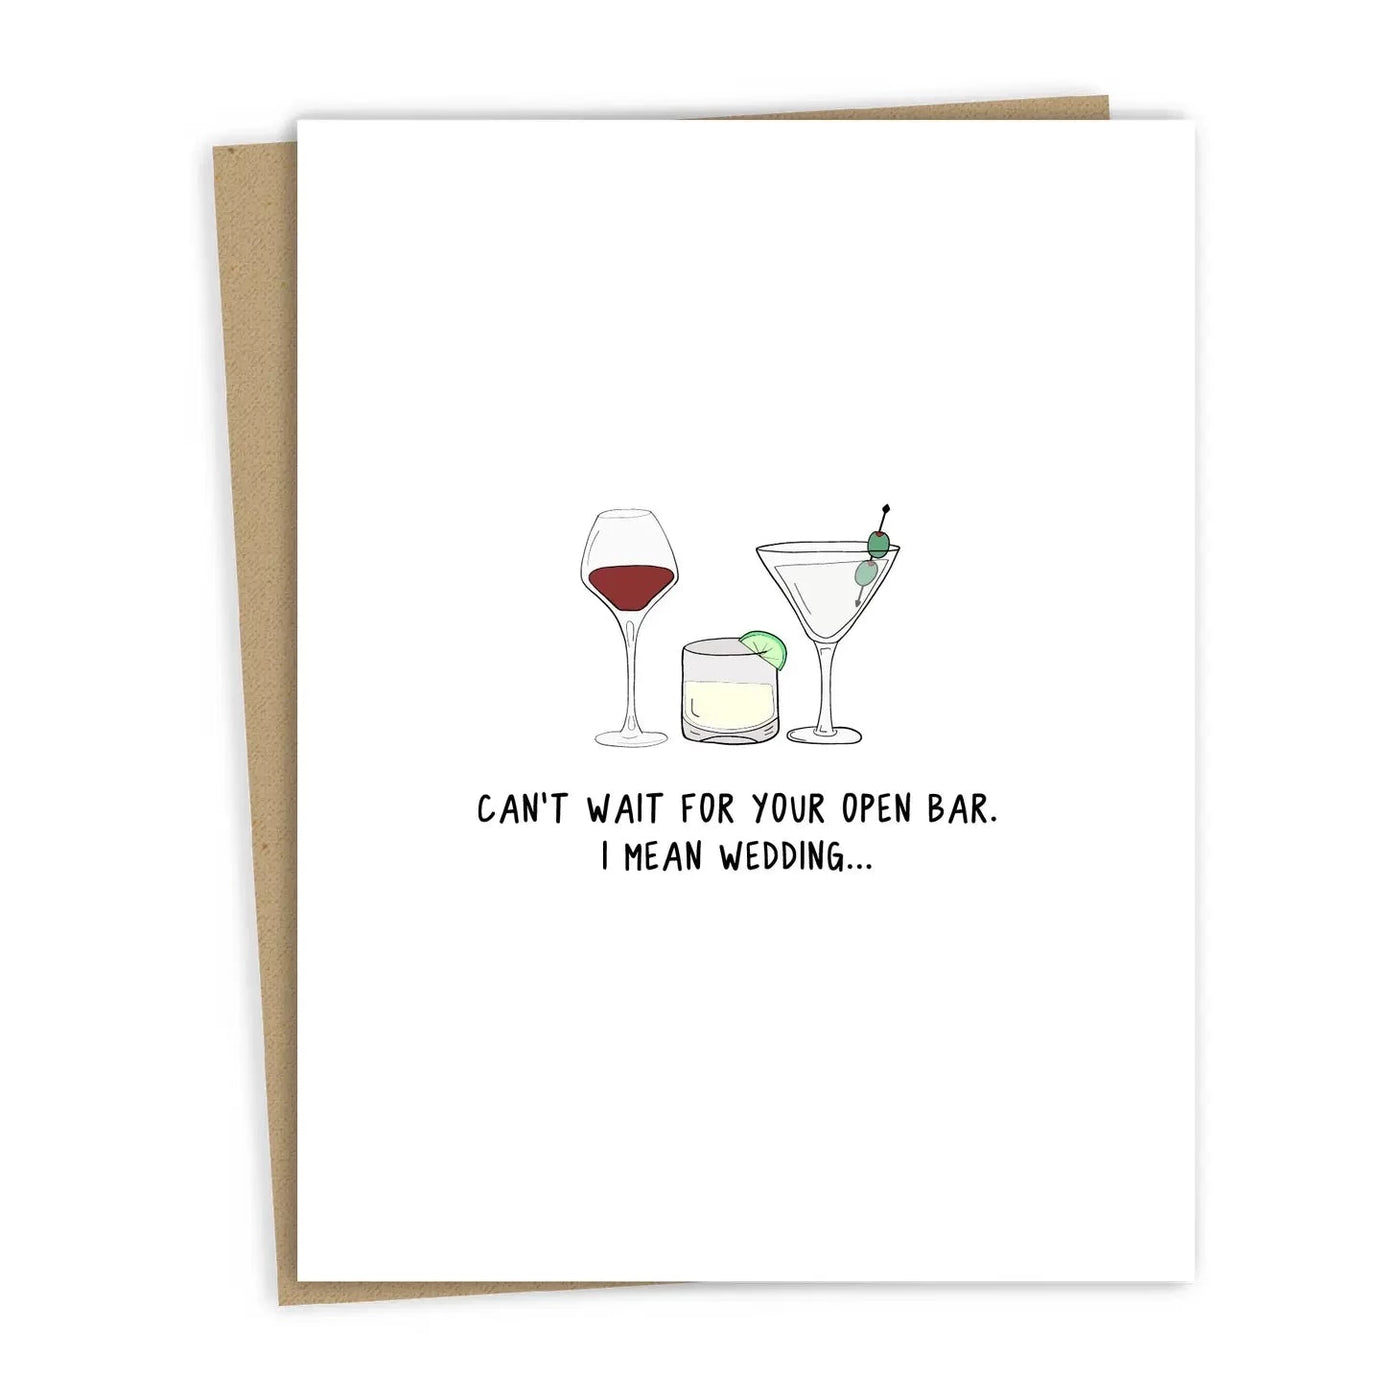 'Cant Wait For Your Open Bar' Wedding Card